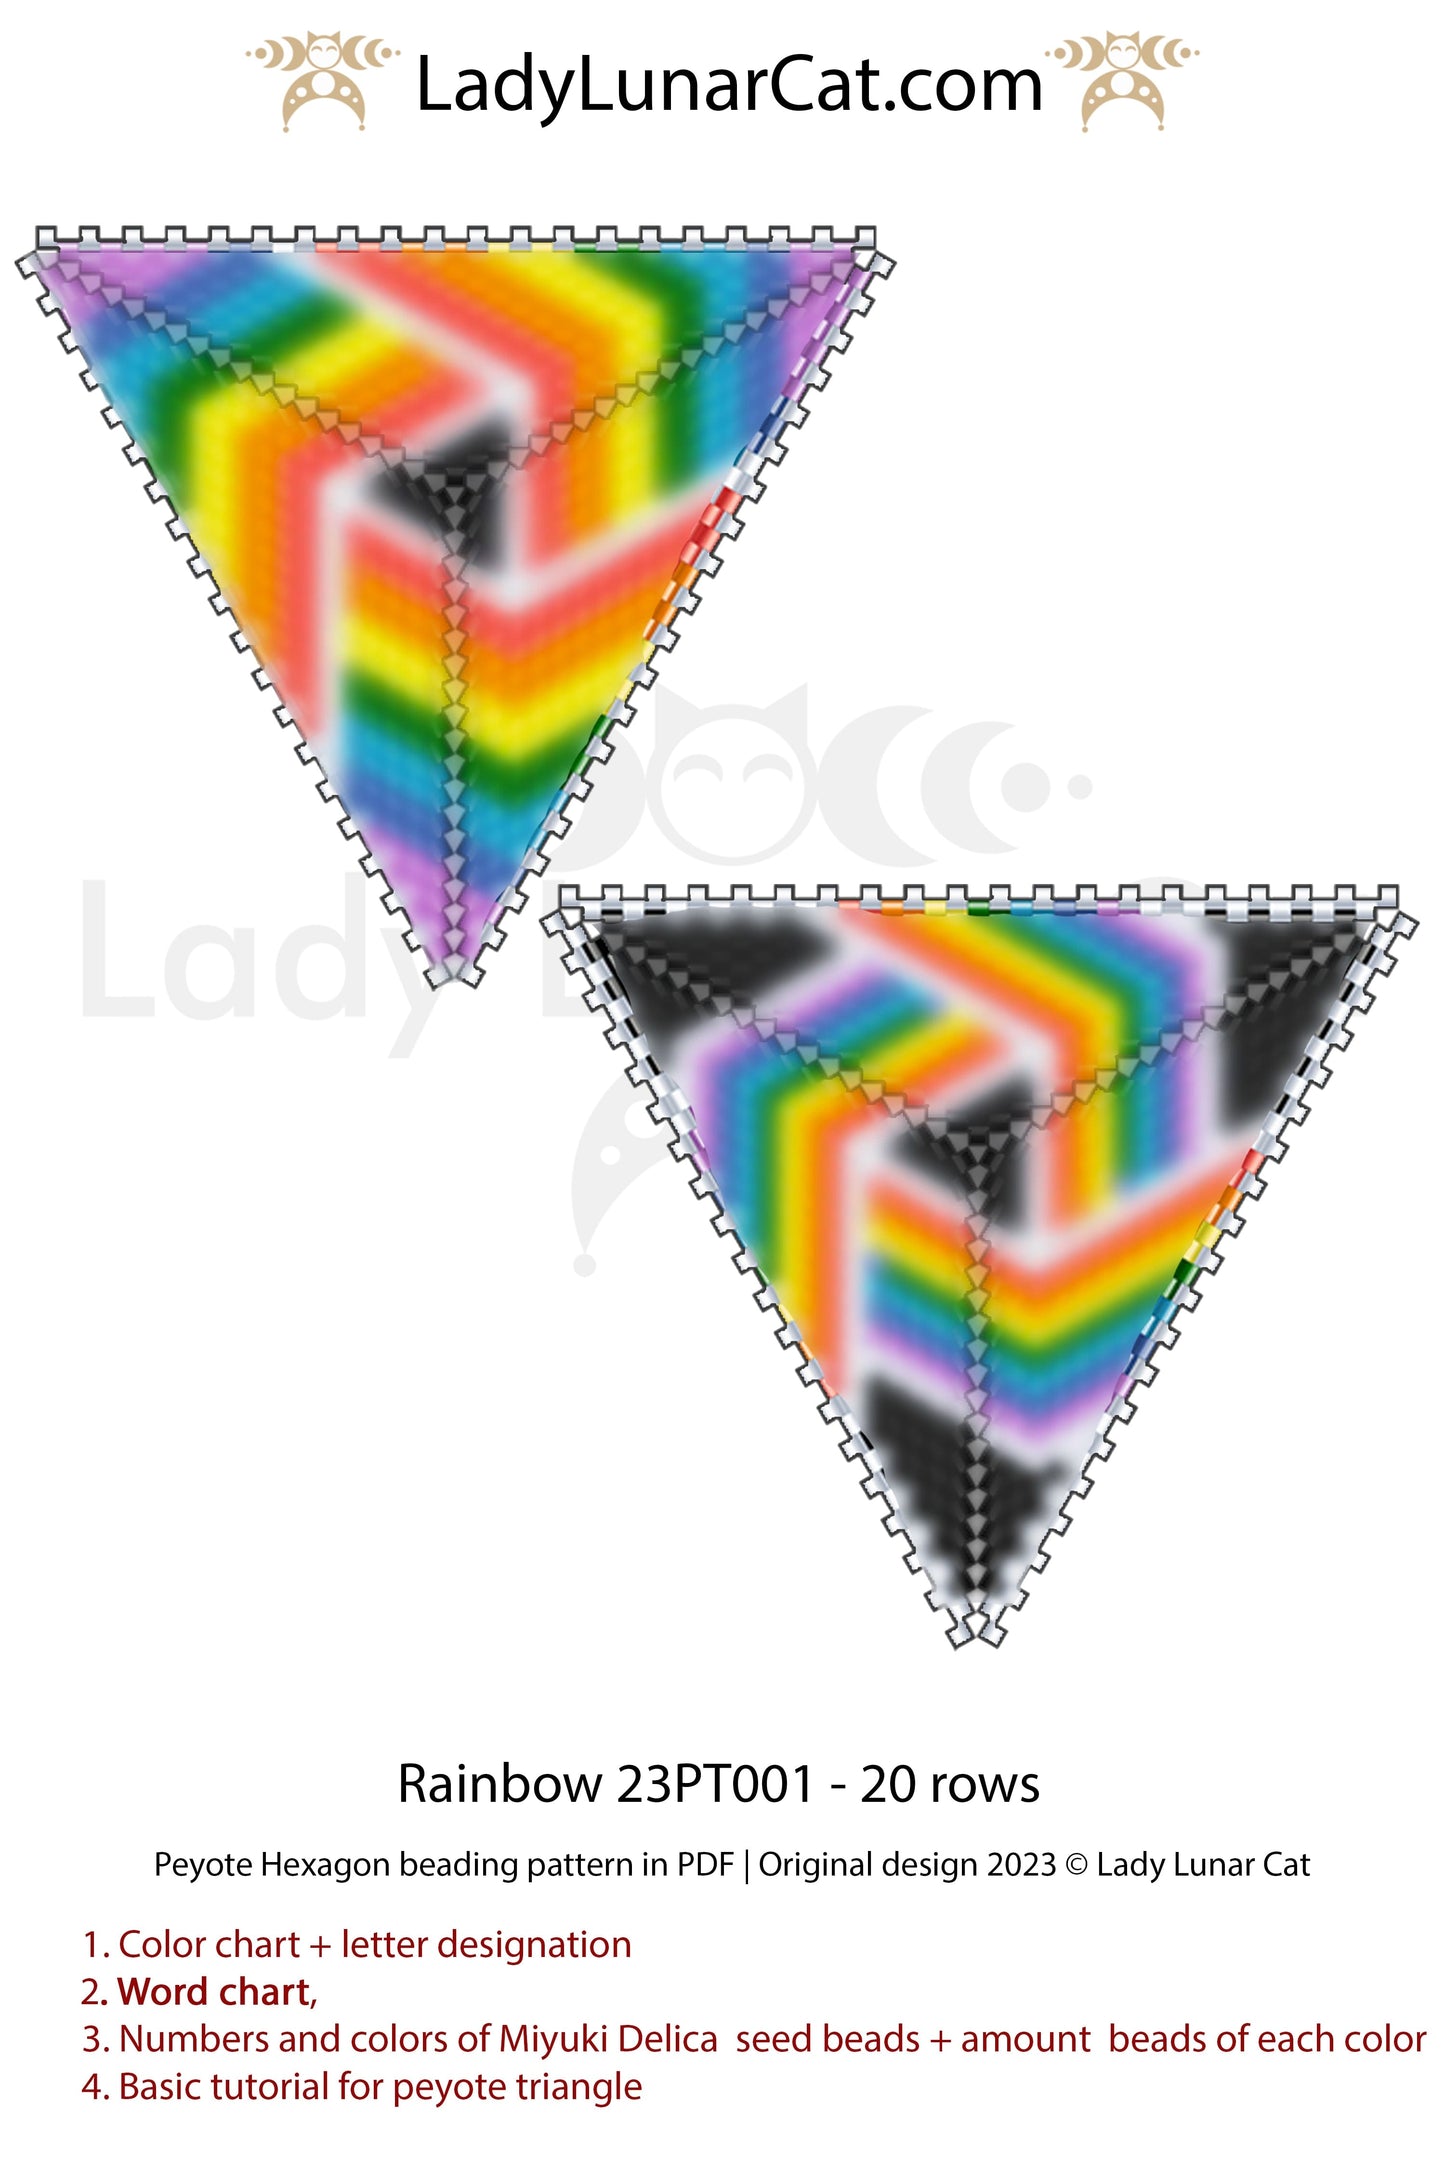 Copy of Peyote triangle pattern for beading Spring Roses 17PT005 LadyLunarCat